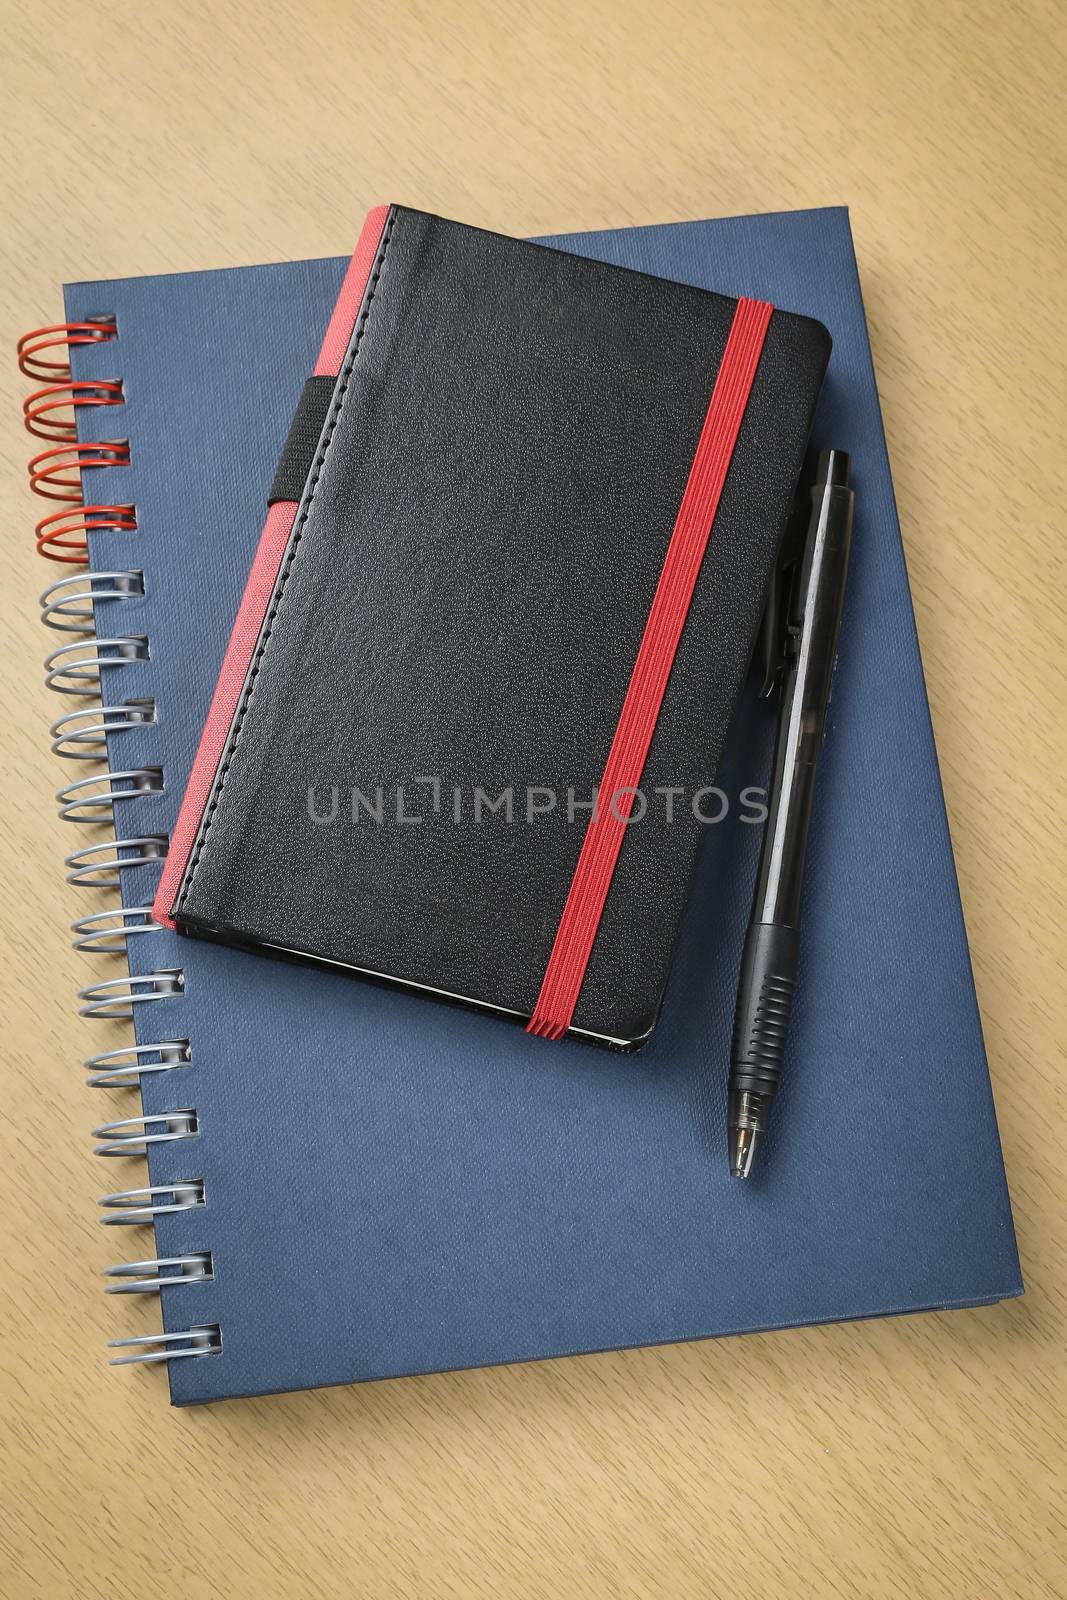 pen and notebook on wooden table, business , education